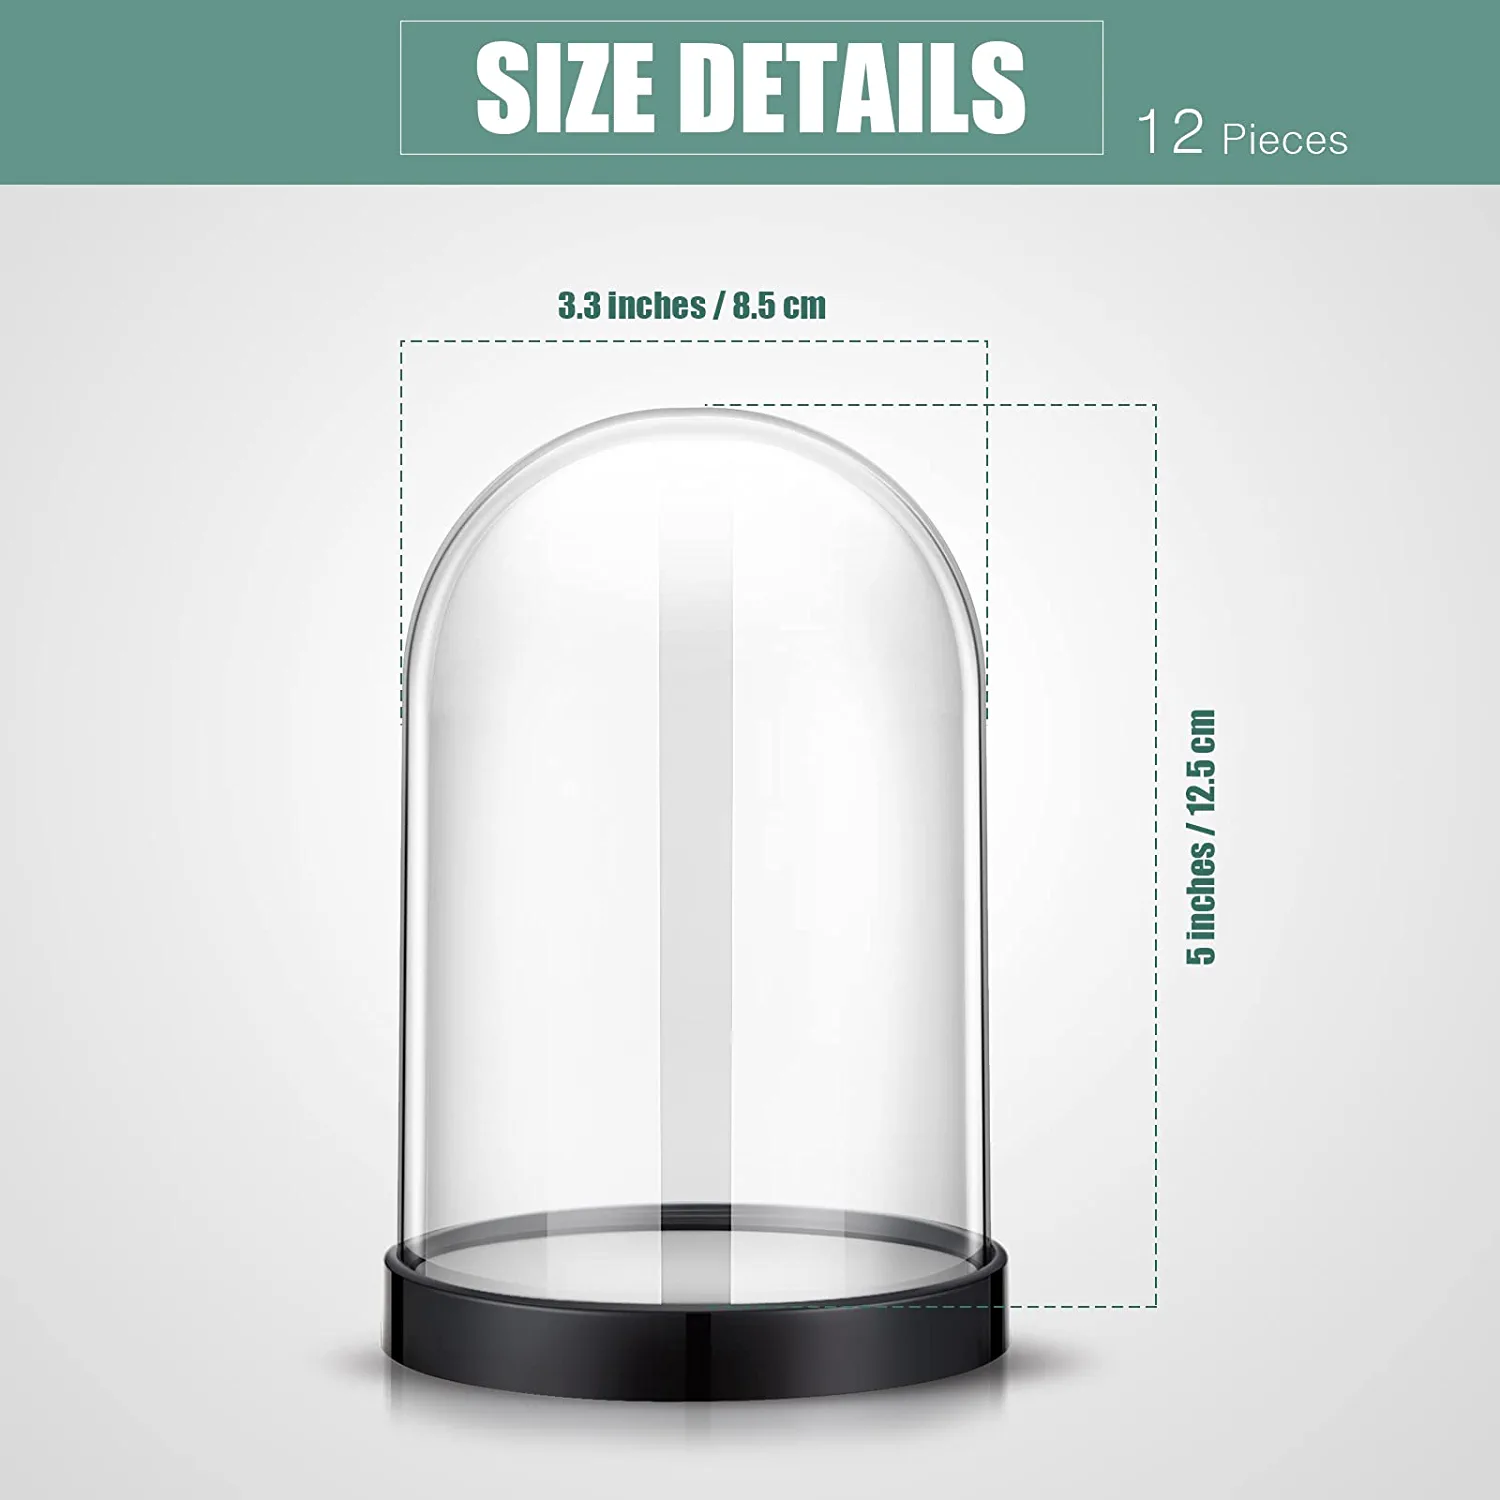 Photo 1 of Zhengmy 12 Pcs Plastic Dome Display Case Cloche Bell Jar with Base Clear Decor for Collectibles Rose Office Home Tabletop CenterPc Decor, 5 x 3.3 Inch, Black ----- BRAND NEW, PACKAGING DAMAGED
